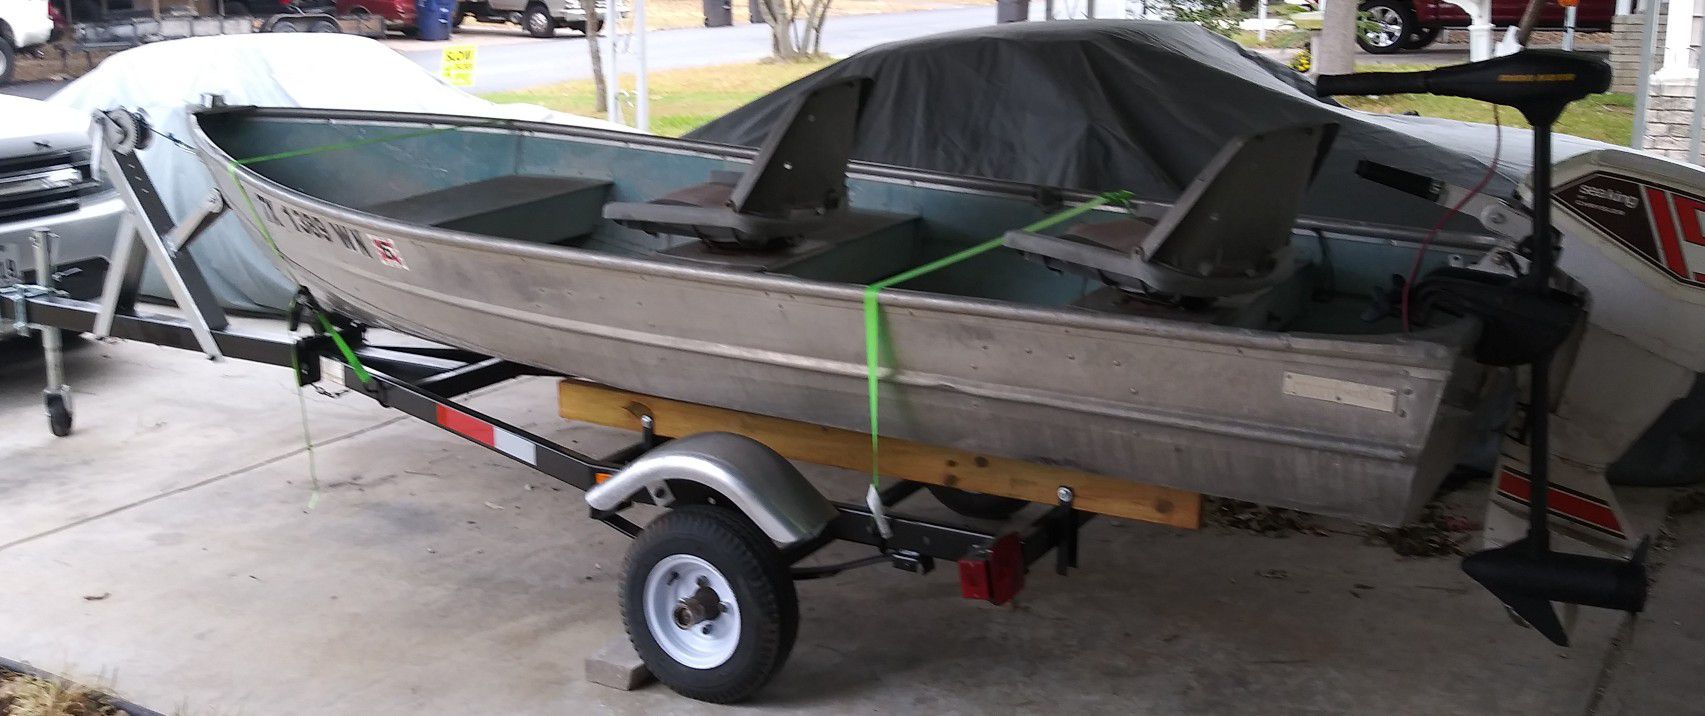 Sea king 12 ft aluminum boat with motor,trolling motor and trailer